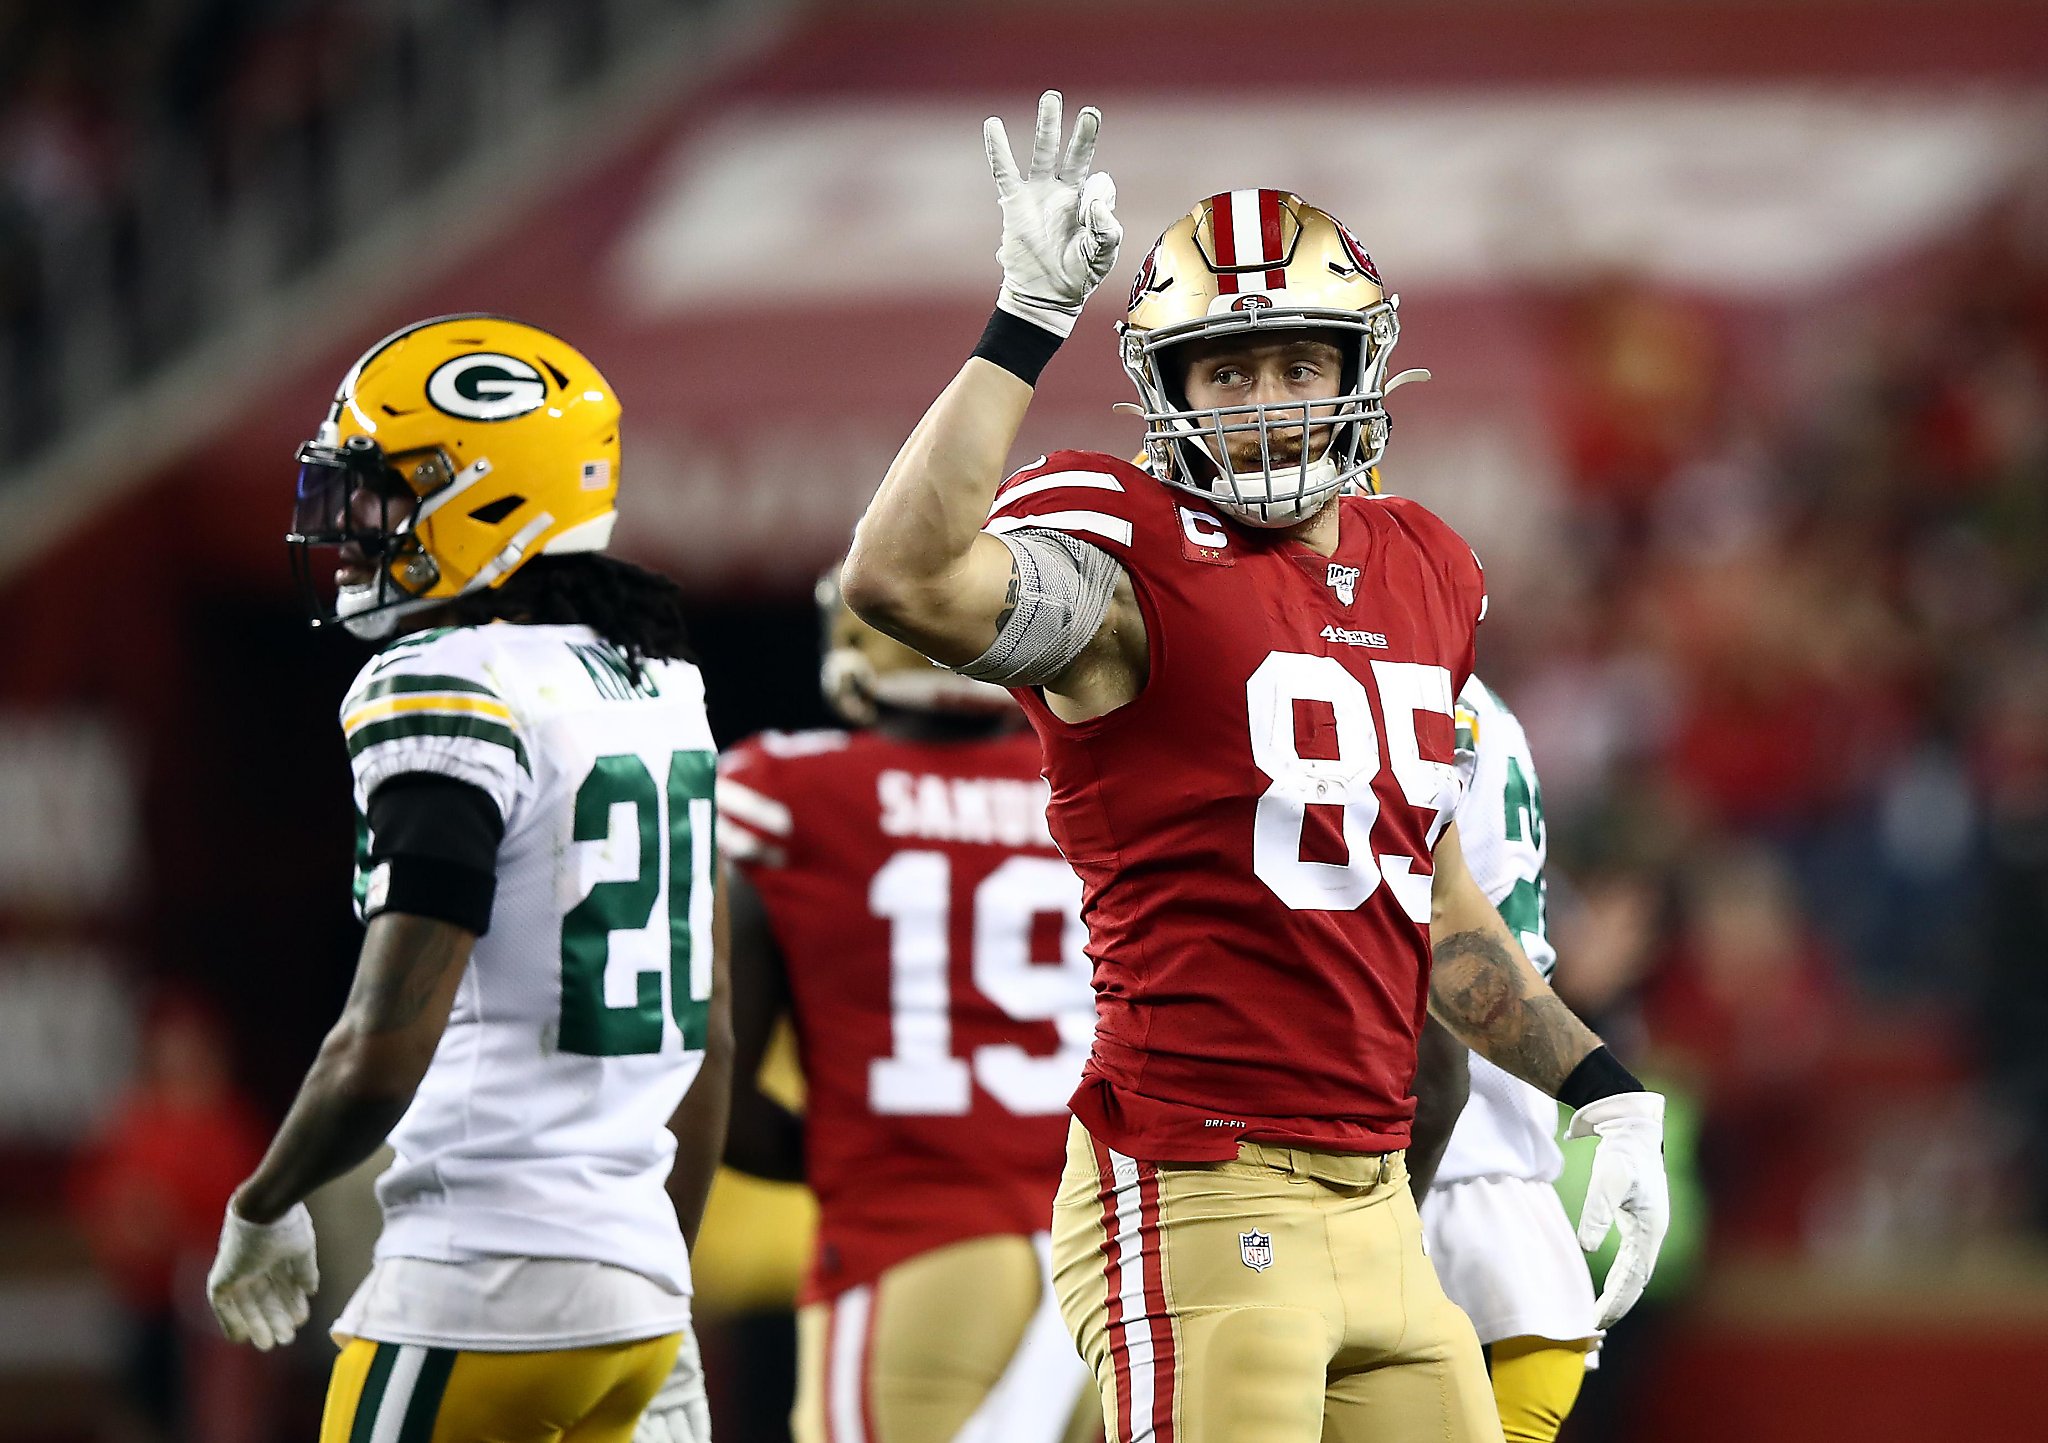 The 49ers will host the Packers, not the Seahawks, in the NFC